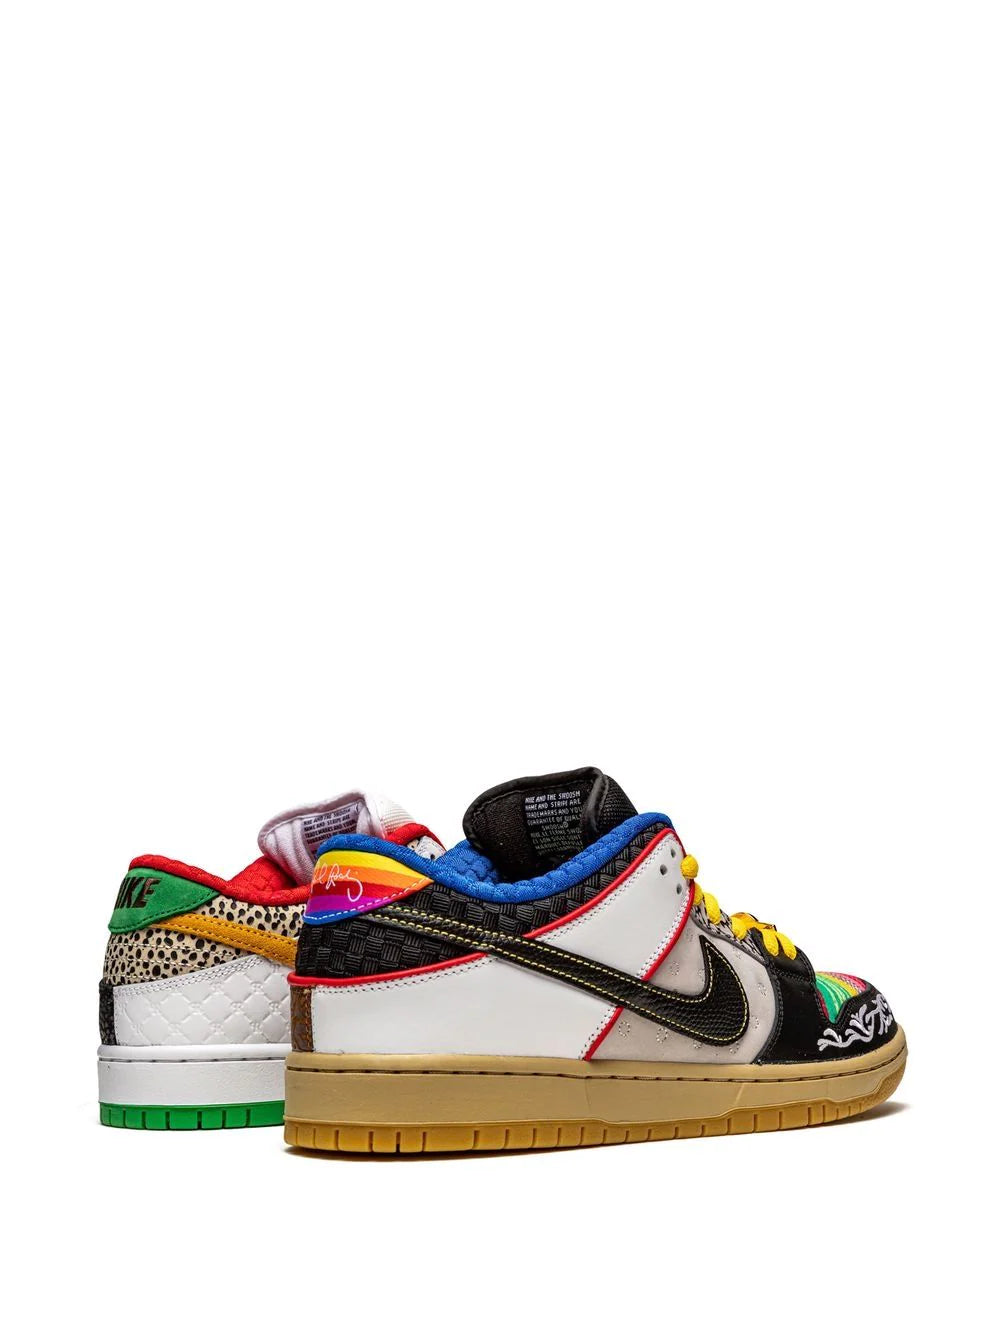 NIKE DUNK LOW - SB WHAT THE P-ROD